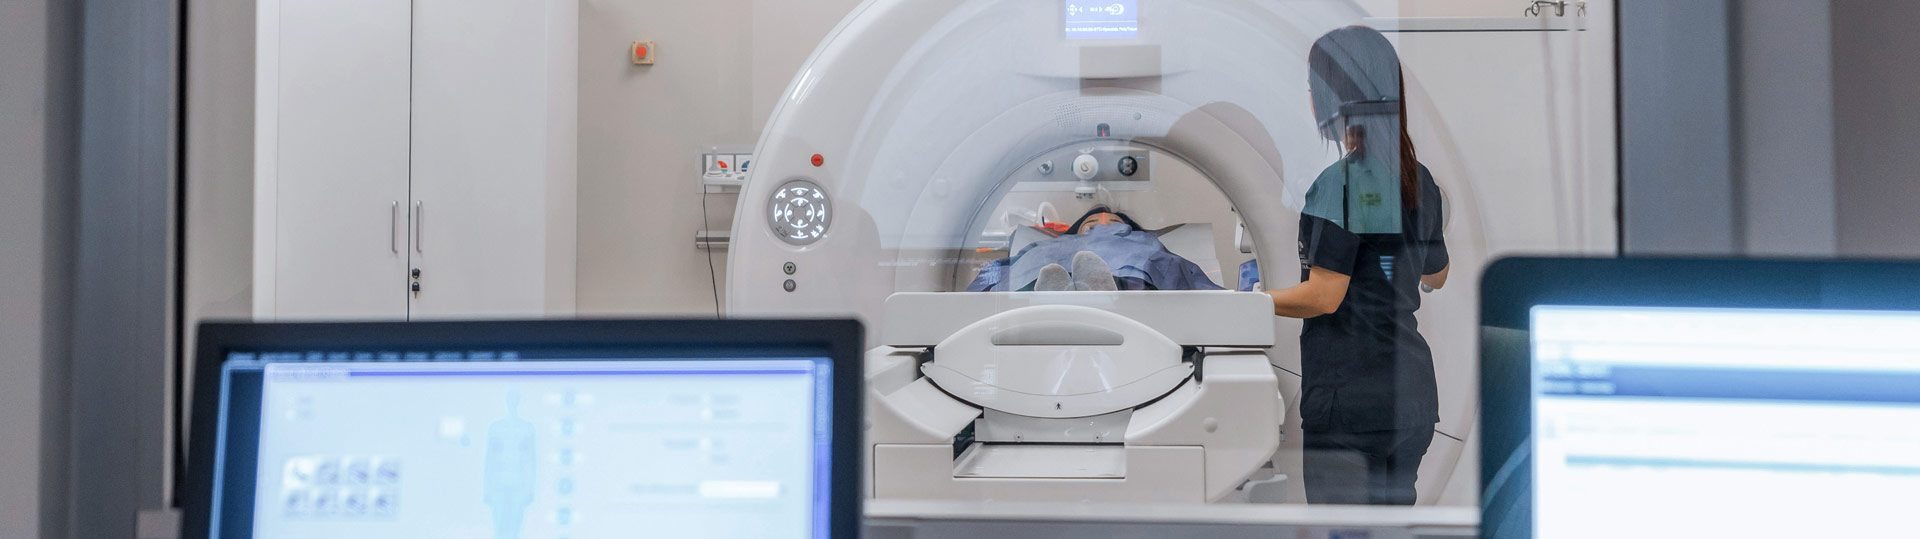 Case Study - MDR Consulting Support - Neuro-Oncology and Interventional Radiology Product - Celegence